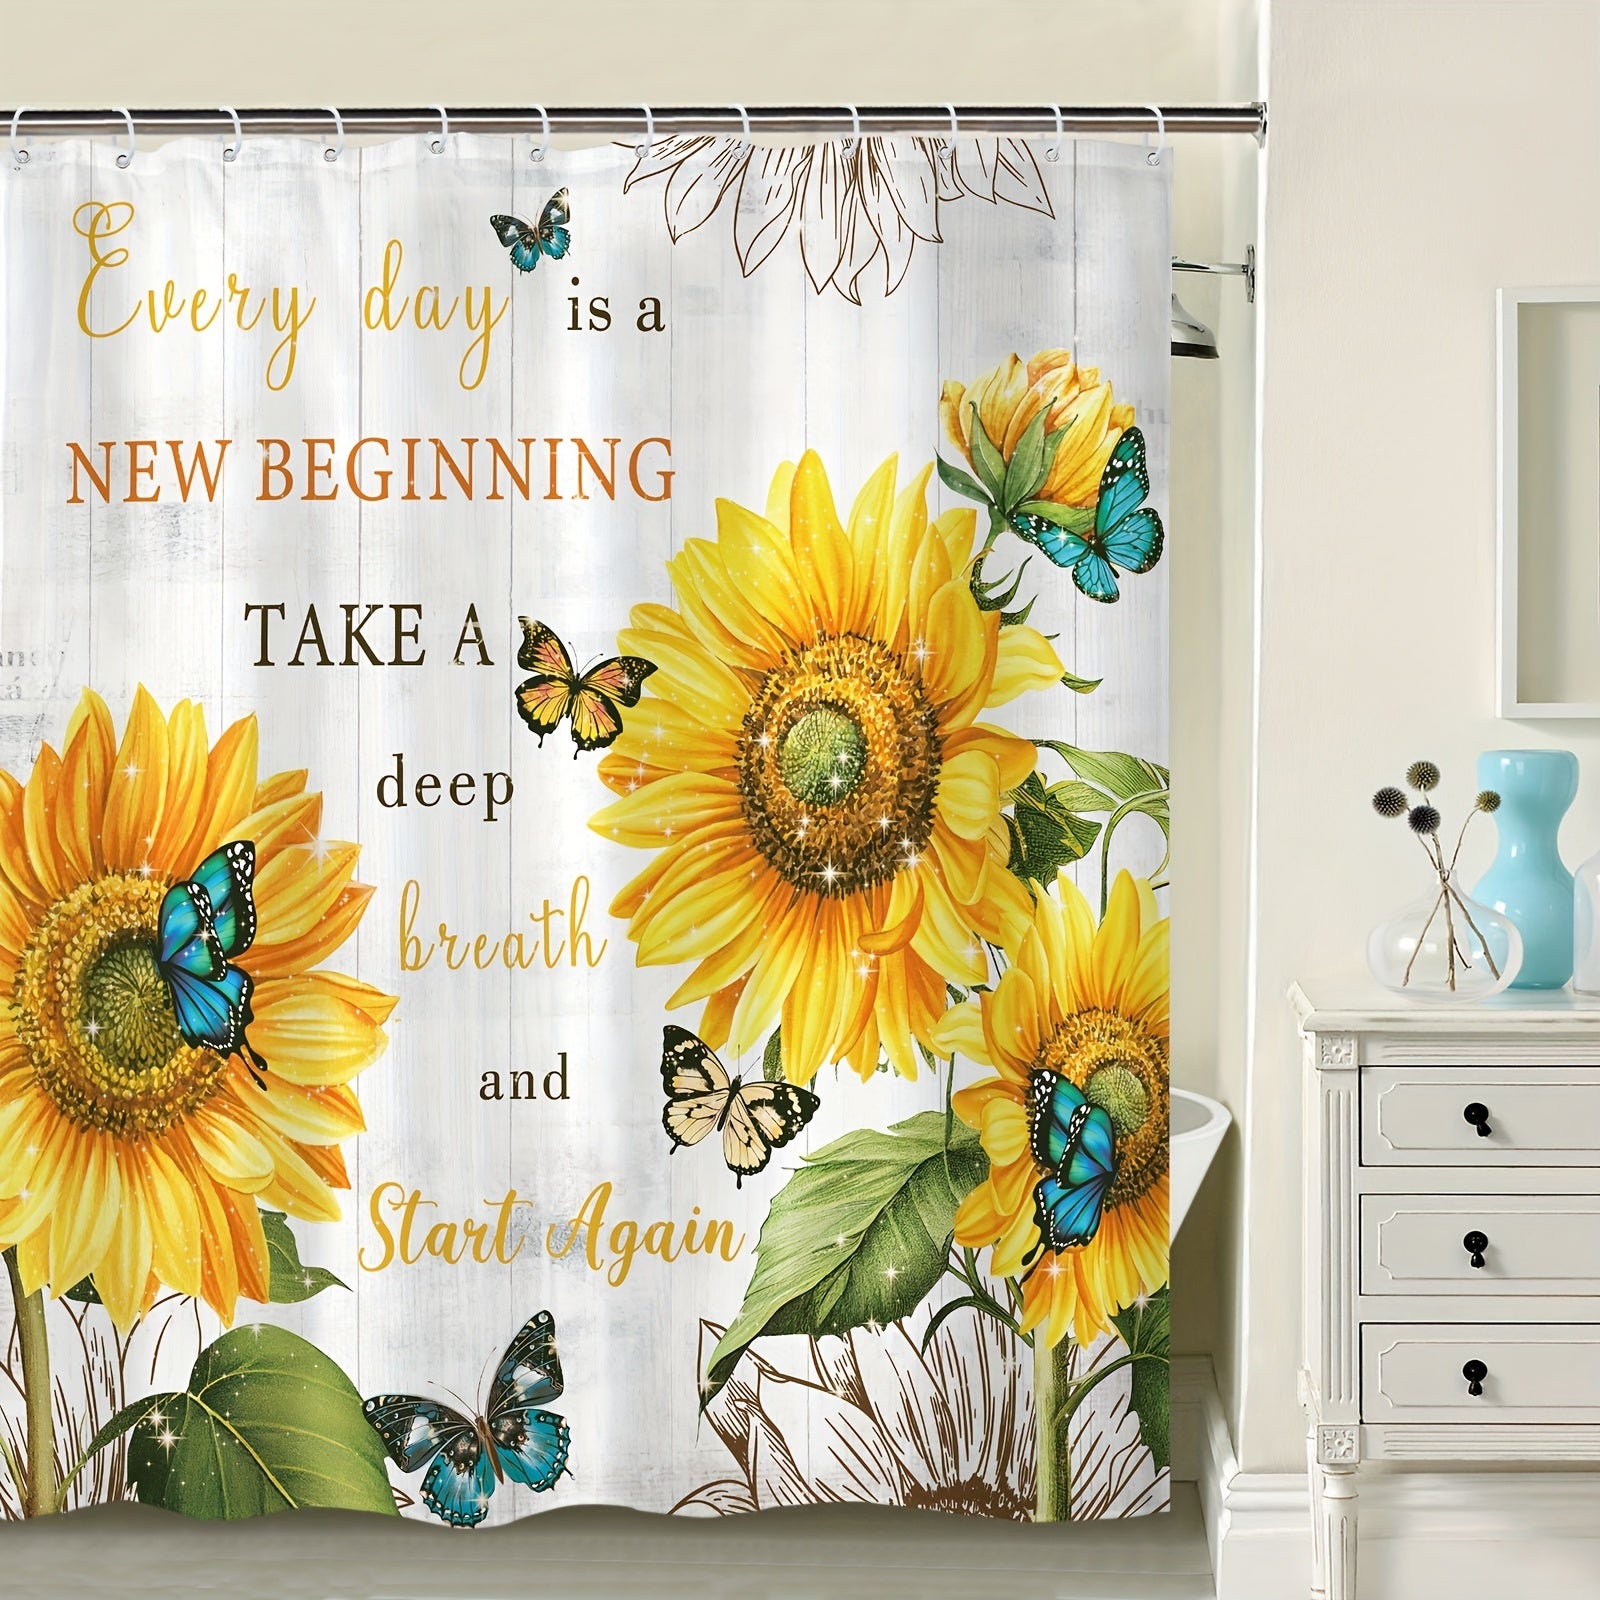 Every Day Is A New Beginning Christian Shower Curtain, 72Wx72H Inch  With 12 Hooks claimedbygoddesigns